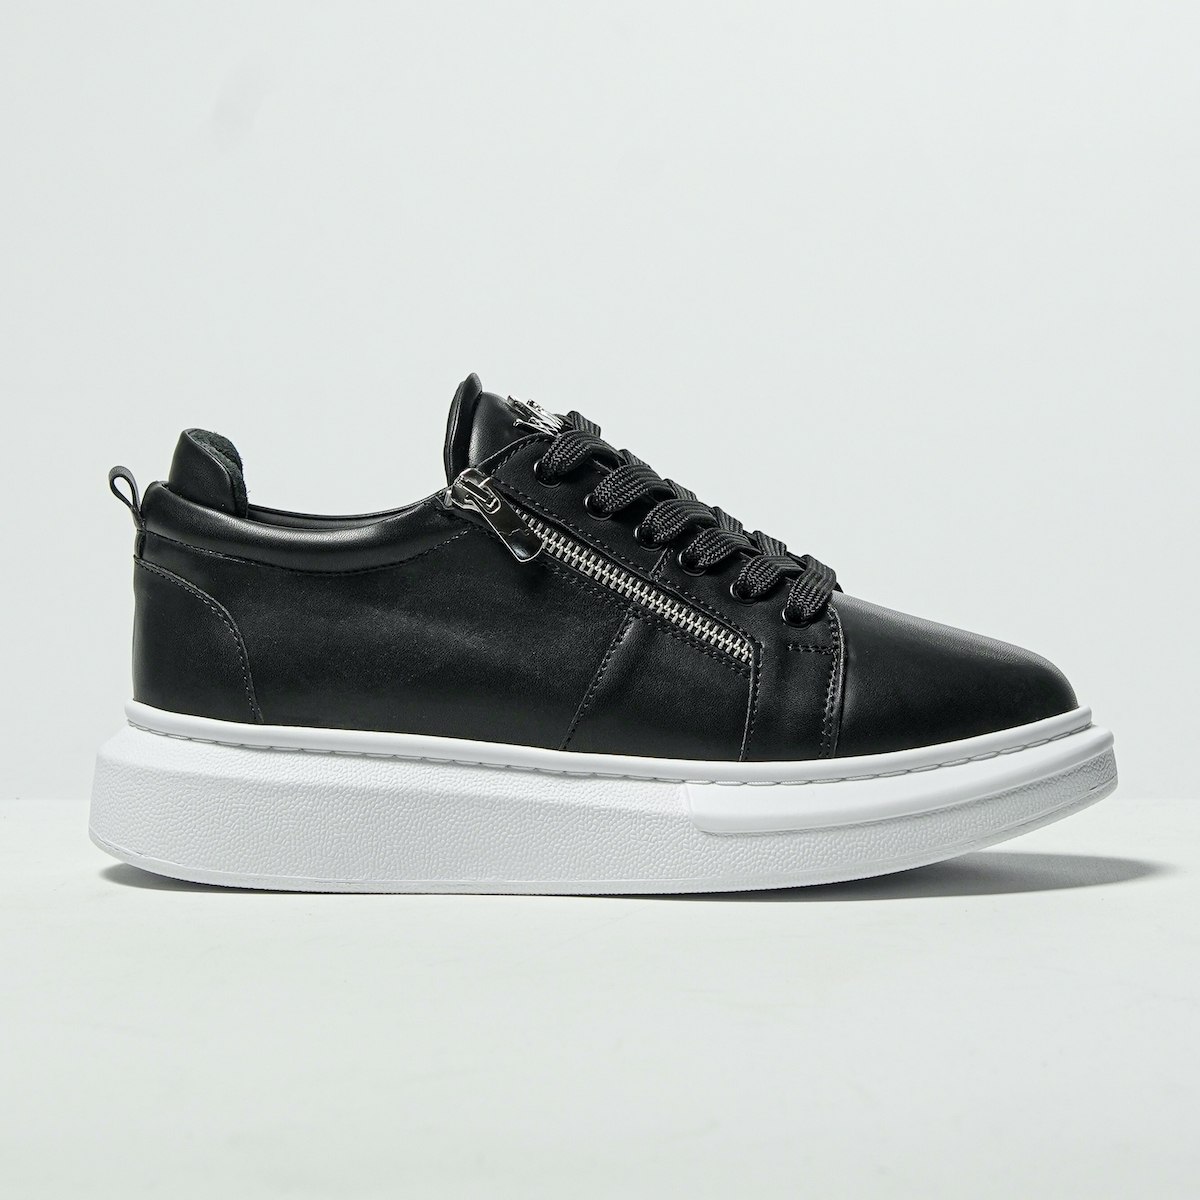 Hype Sole Zipped Style Sneakers in Black-White - 1